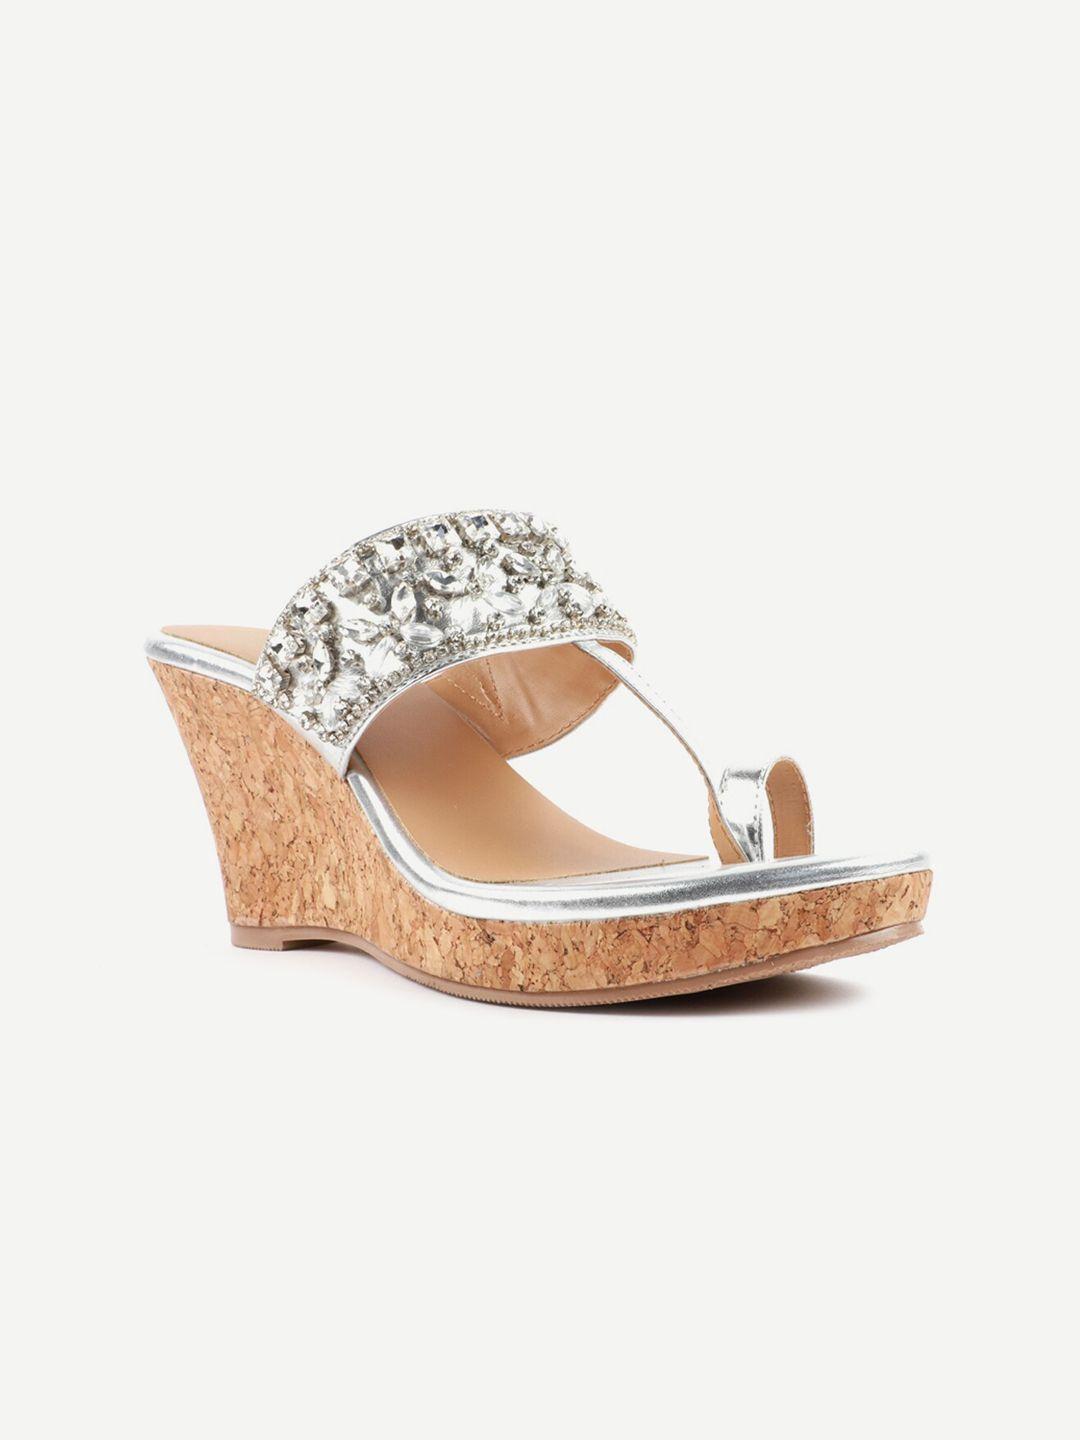 carlton london silver-toned wedge sandals with laser cuts